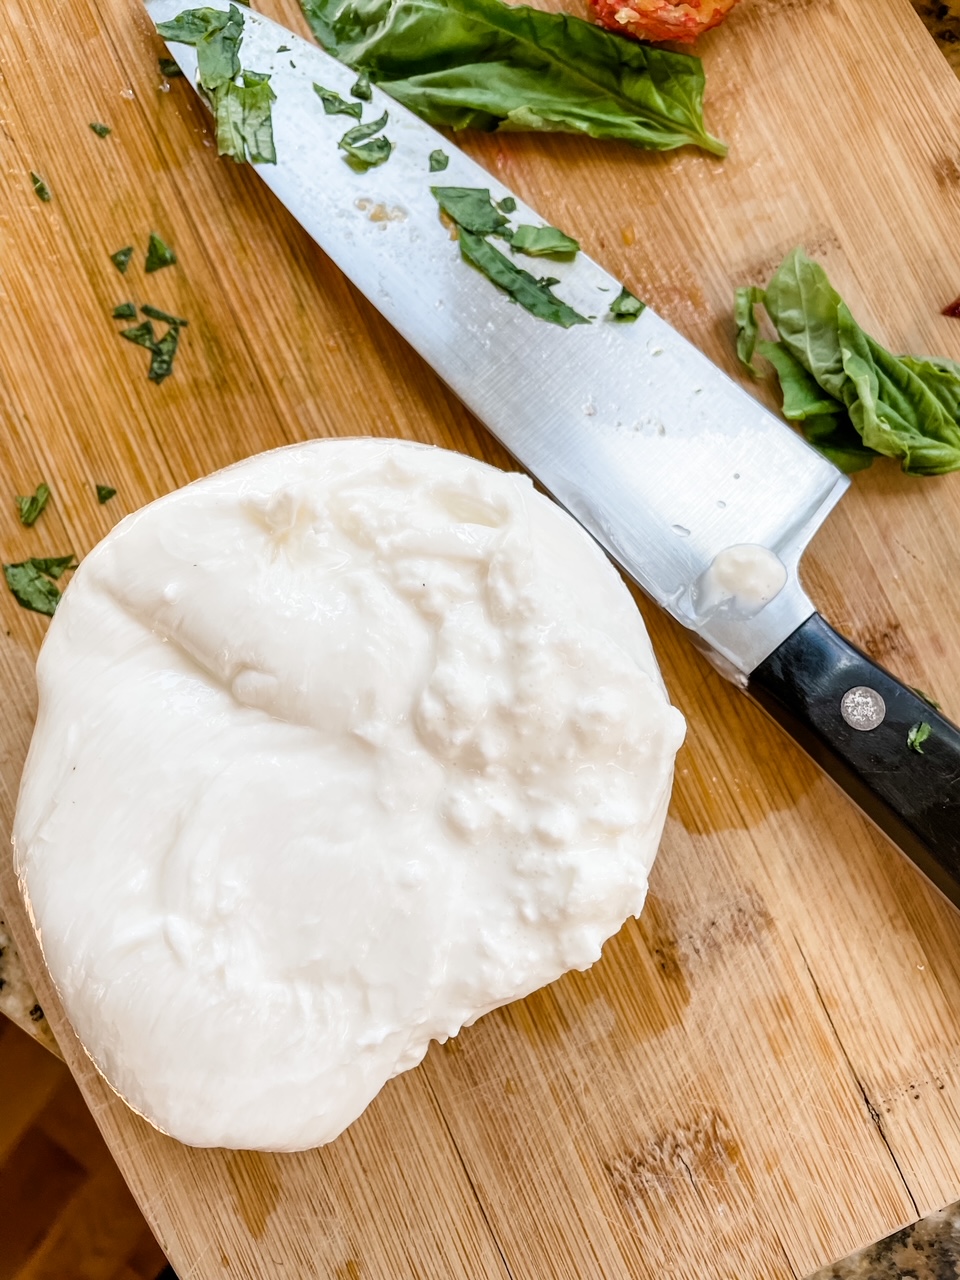 A hunk of burrata, sliced in half, next to a knife on a cutting board